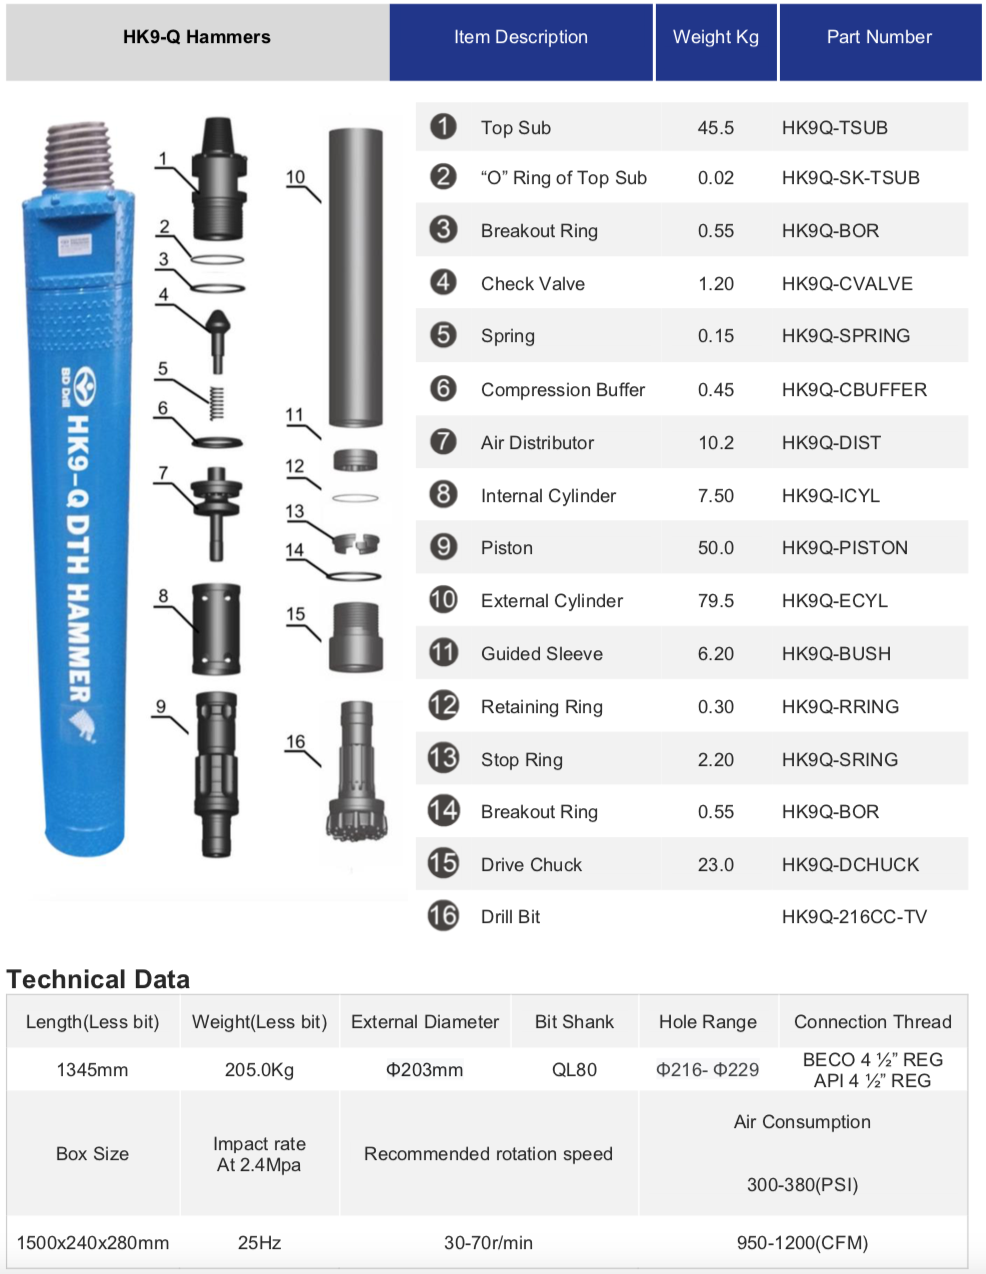 Black Diamond Drilling HK9-Q DTH Hammer schematic parts list and technical data